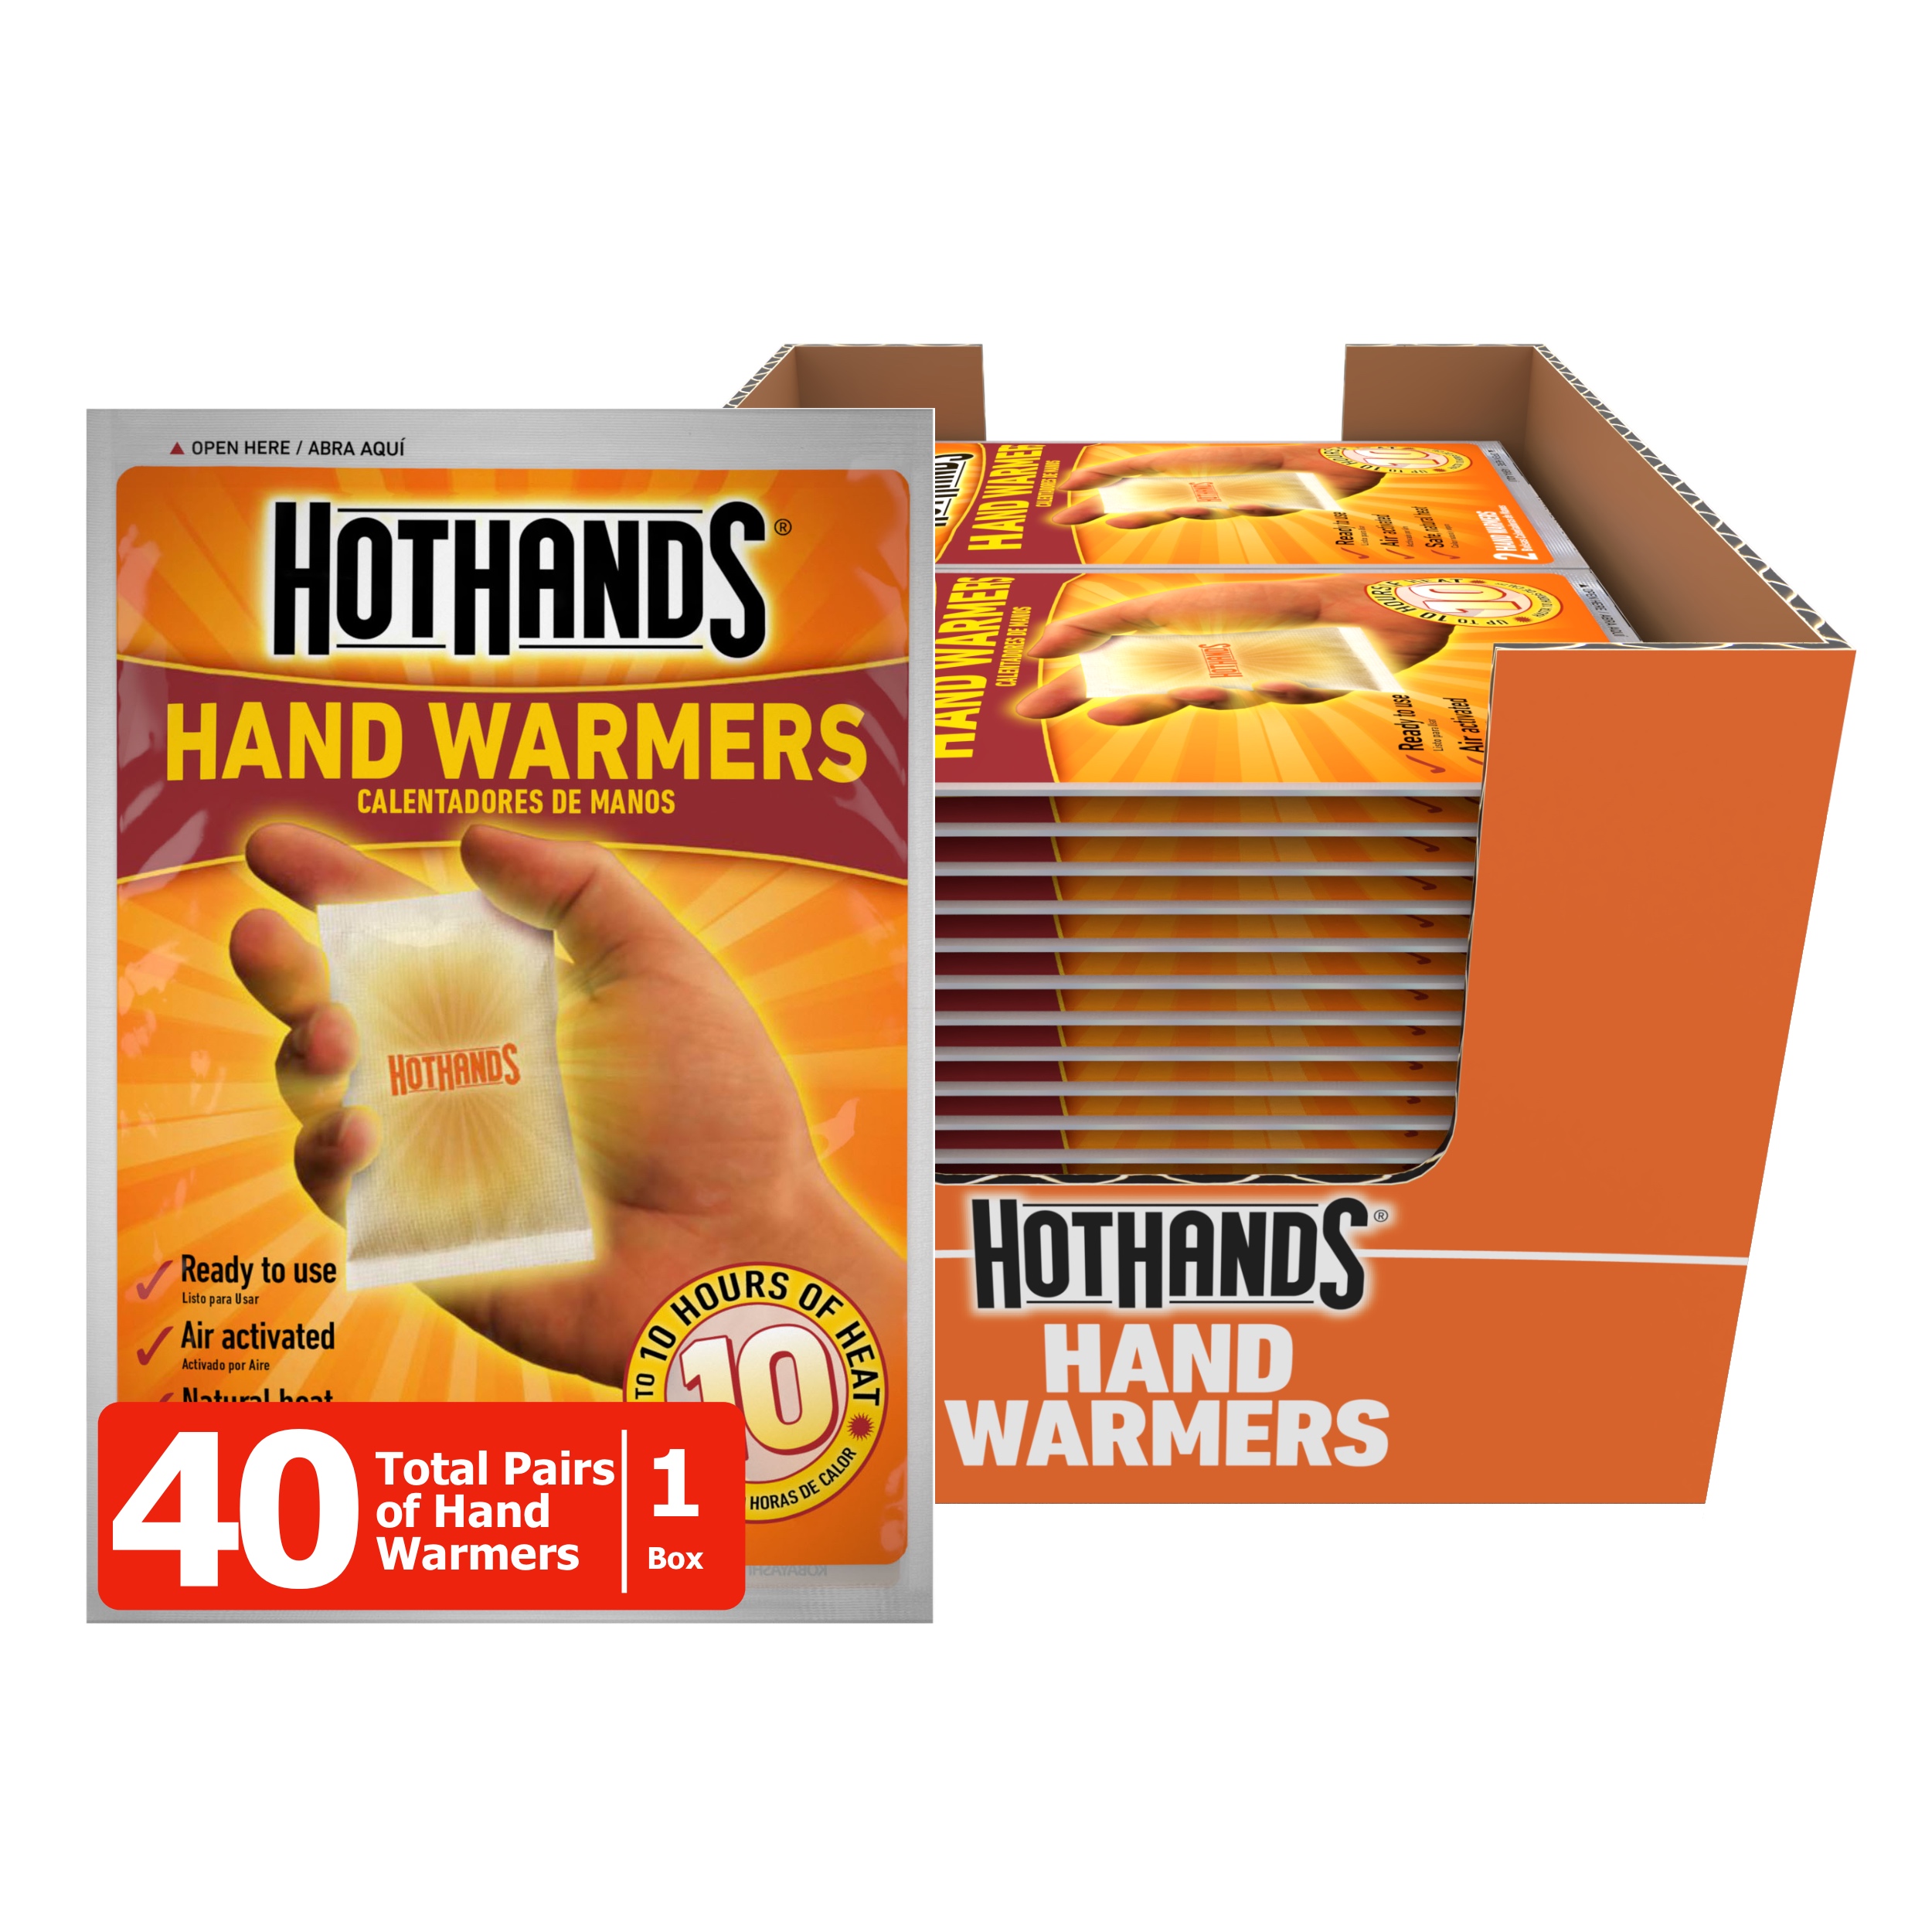 HotHands Hand Warmers 40 Pack - image 1 of 5